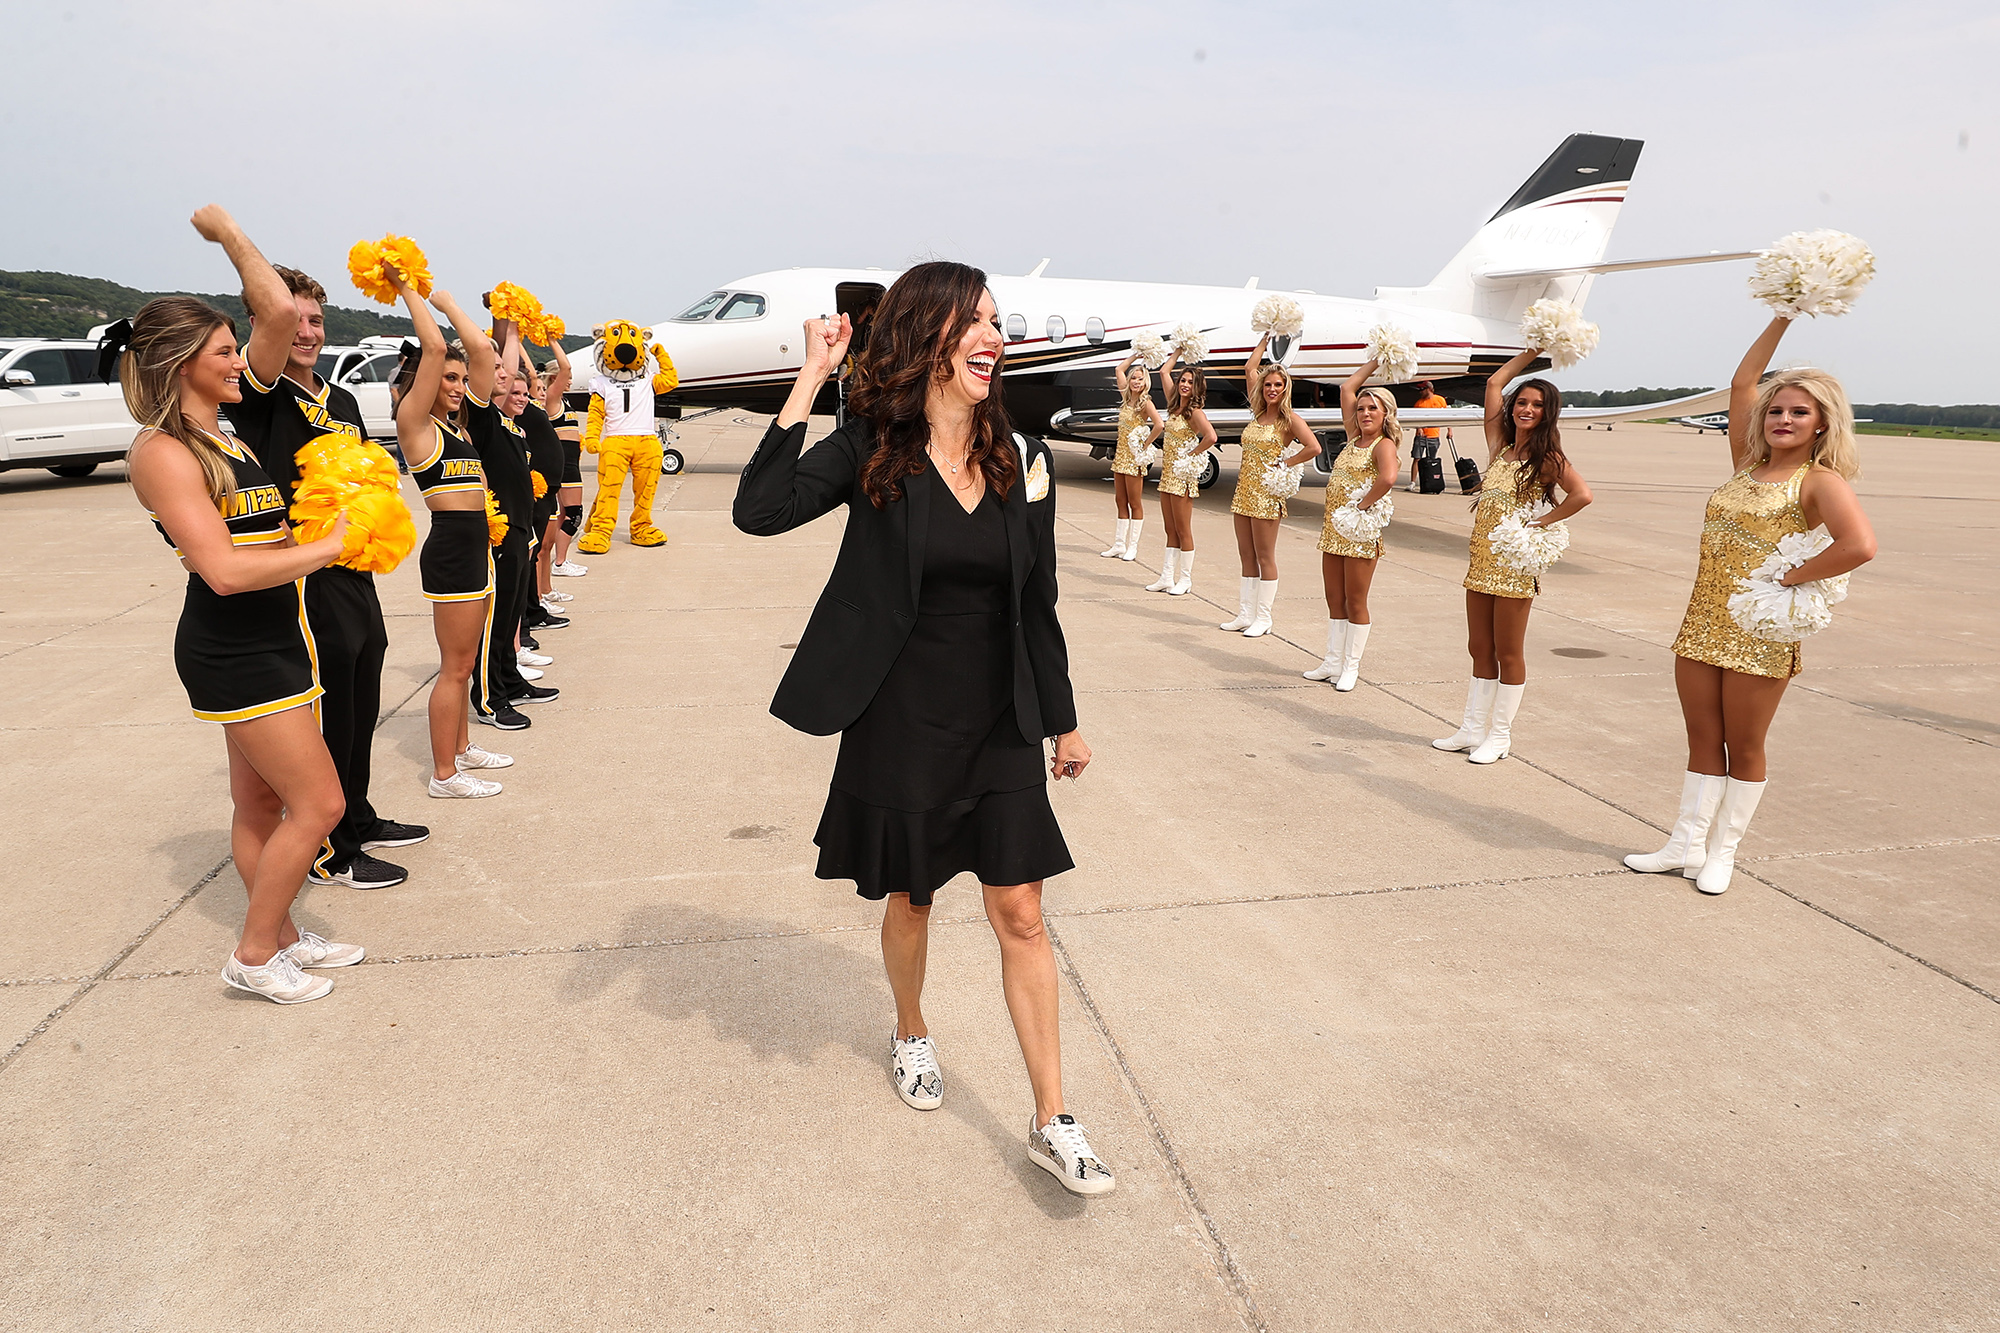 desiree reed-francois greets cheerleaders and golden girls